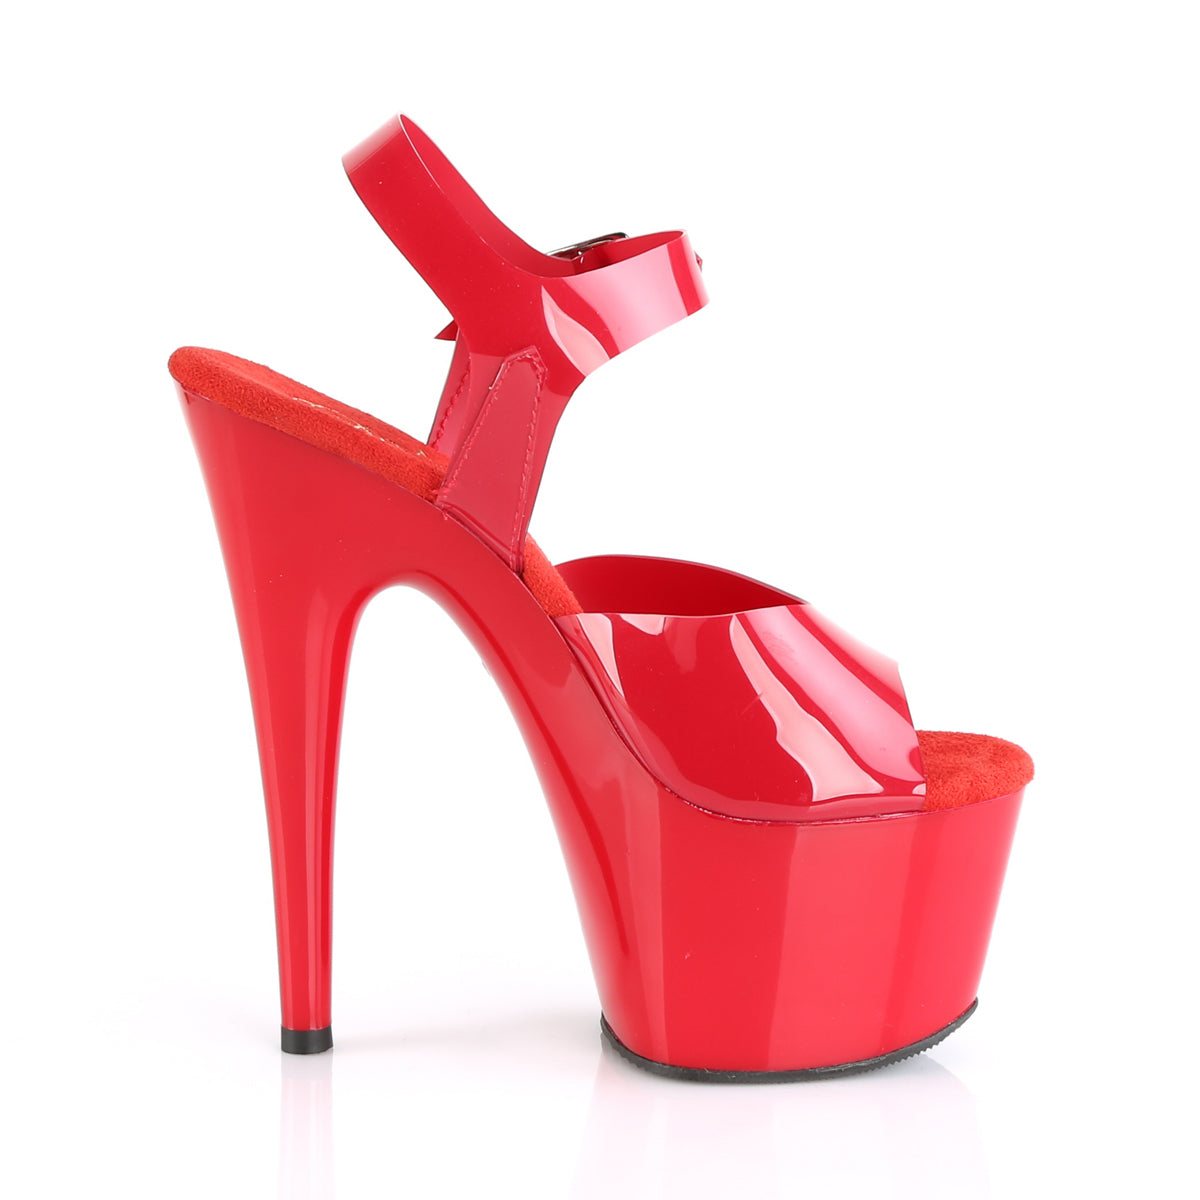 ADORE-708N / RTPU / M 7 "PLEASER FAST DELIVERY 24-48h 